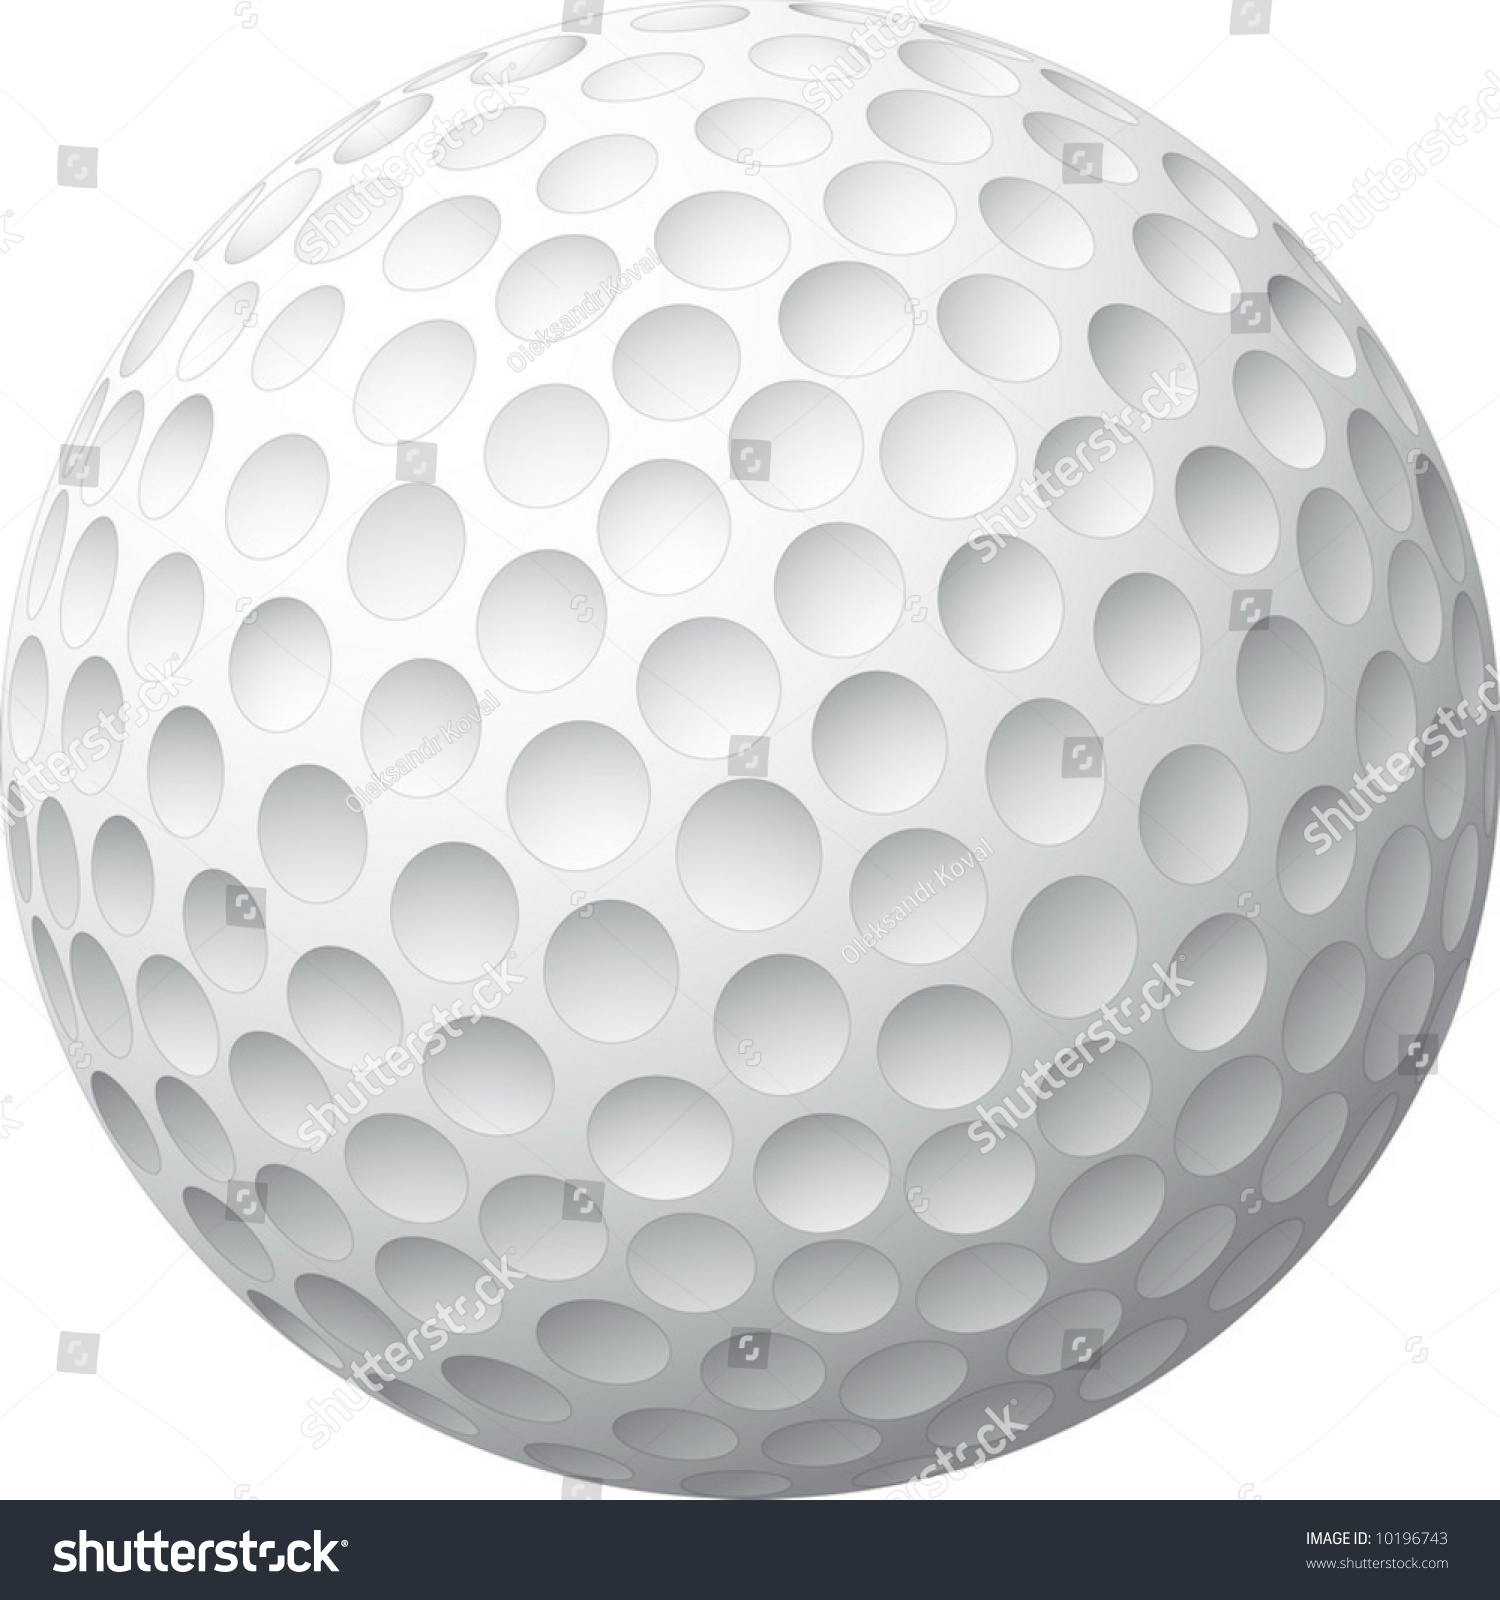 pictures of golf balls clipart - photo #50